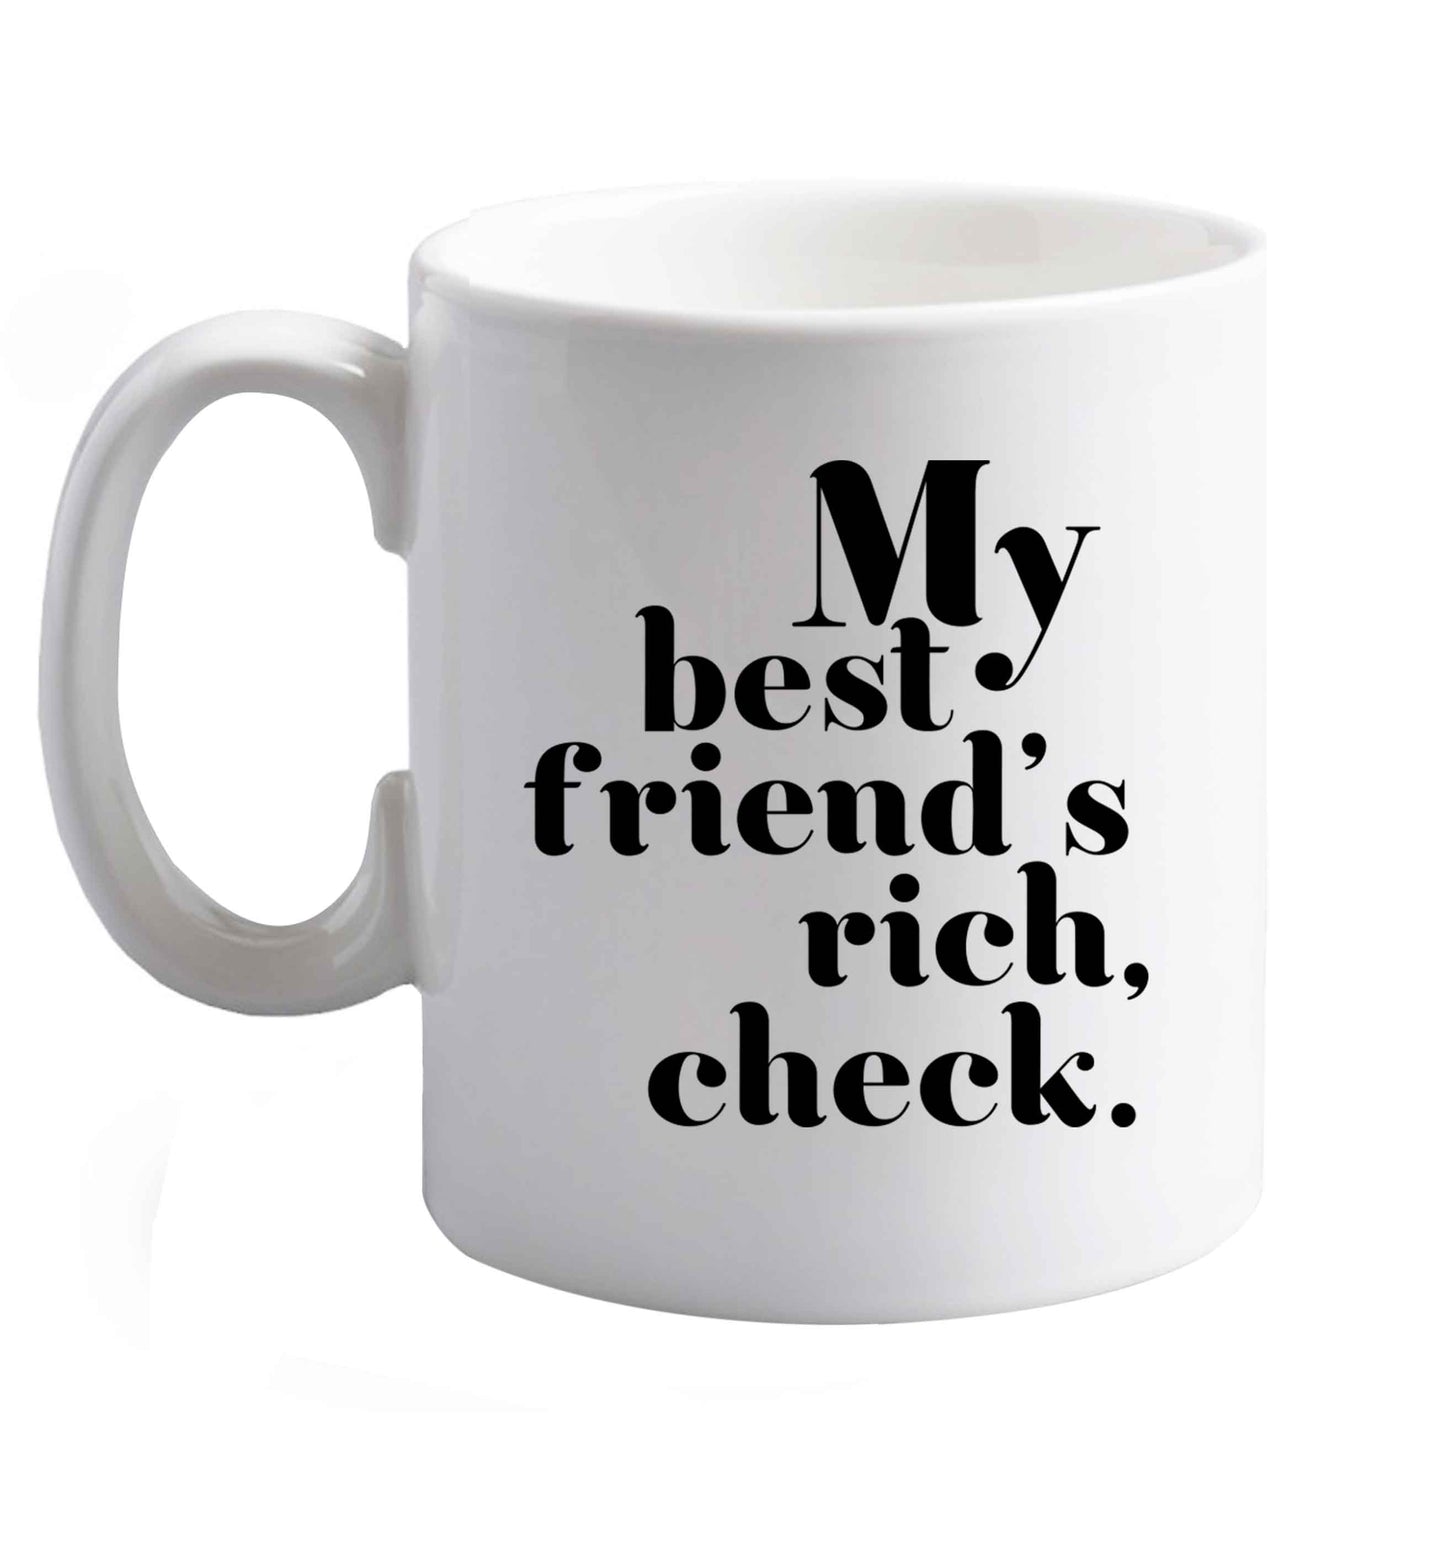 10 oz Got a rich best friend? Why not ask them to get you this, just let us  know and we'll tripple the price ;)    ceramic mug right handed